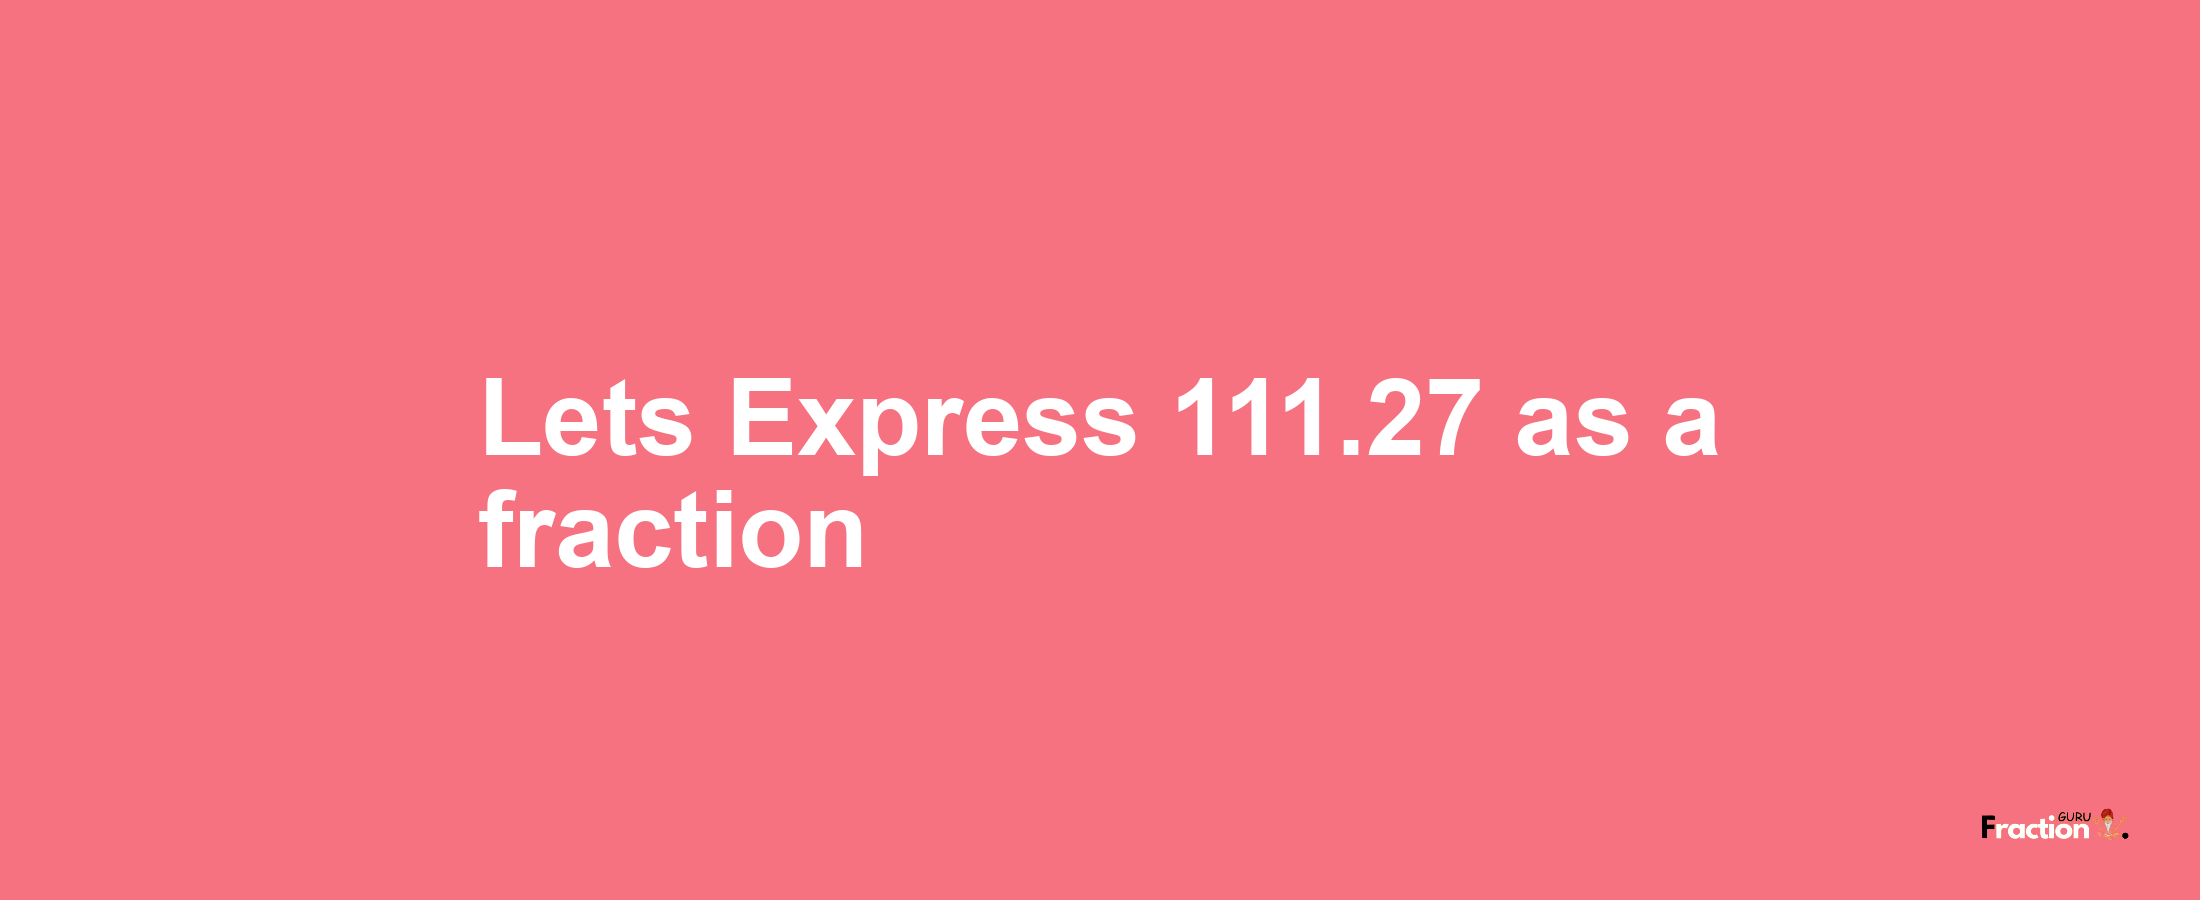 Lets Express 111.27 as afraction